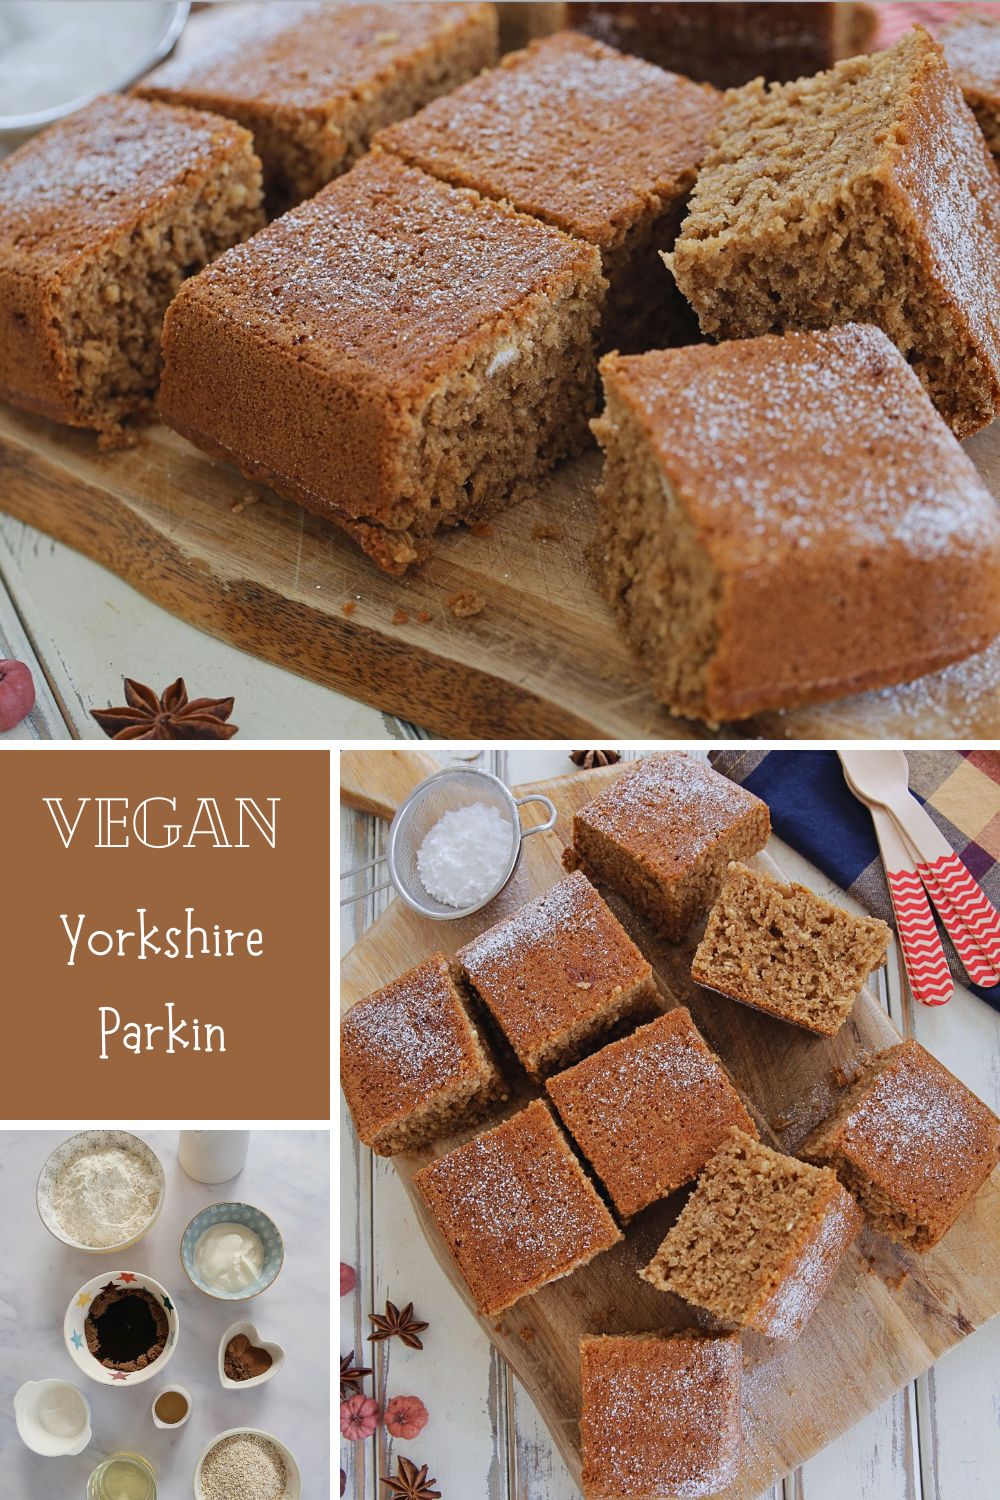 A traditional cake often made for Bonfire Night celebrations in the UK, Parkin is a deliciously moist spiced ginger cake made with oats and dark browns sugar | Recipe on the cookandhim.com #vegancake #bonfirenightfood #parkin #gingercake #spicecake